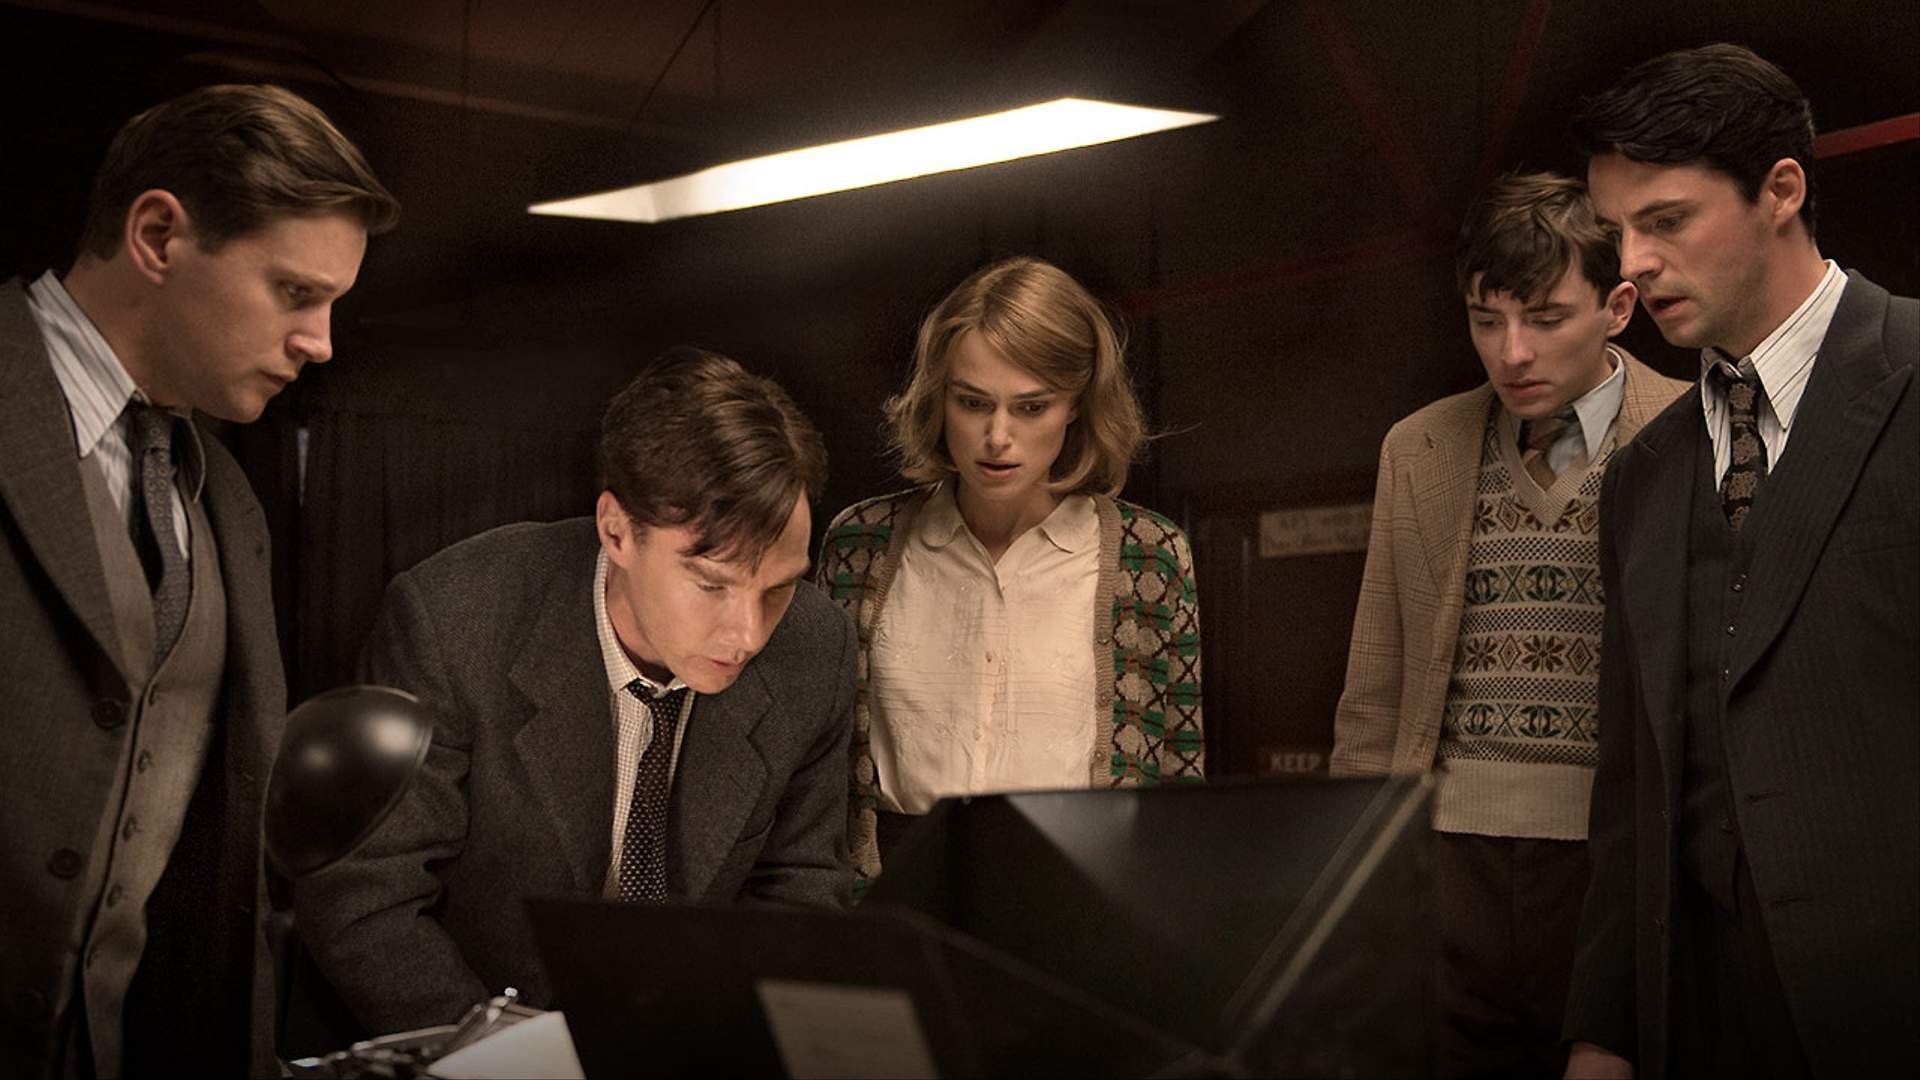 The Imitation Game: The wartime efforts of Alan Turing, whose work was essential to defeating the German army, 2014, Drama. 1920x1080 Full HD Wallpaper.